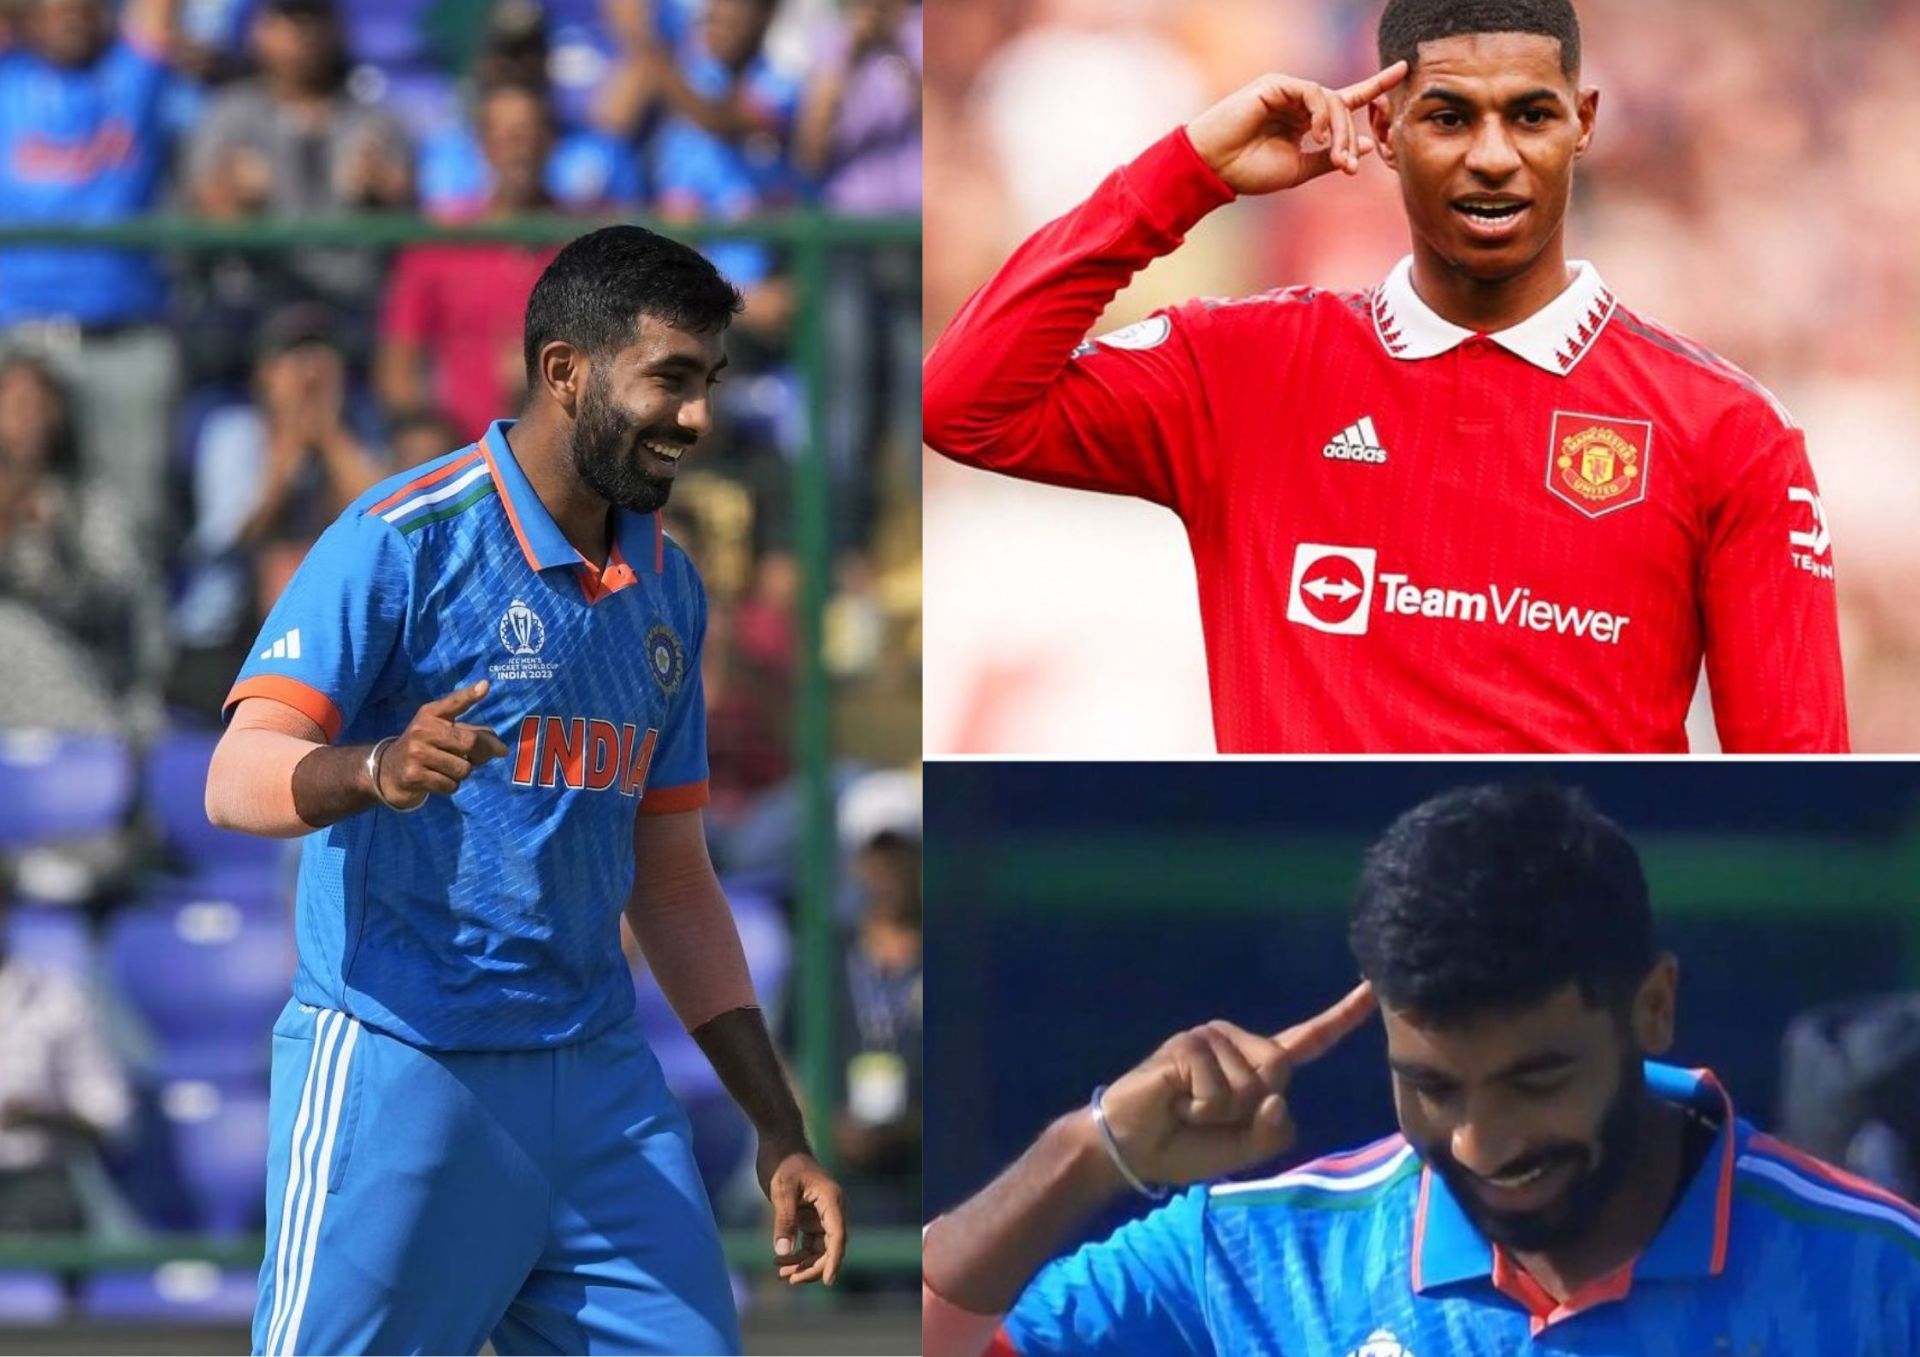 Jasprit Bumrah did what he does best - before pulling off a Marcus Rashford celebration (Picture Credits: AP; Disney+Hotstar)